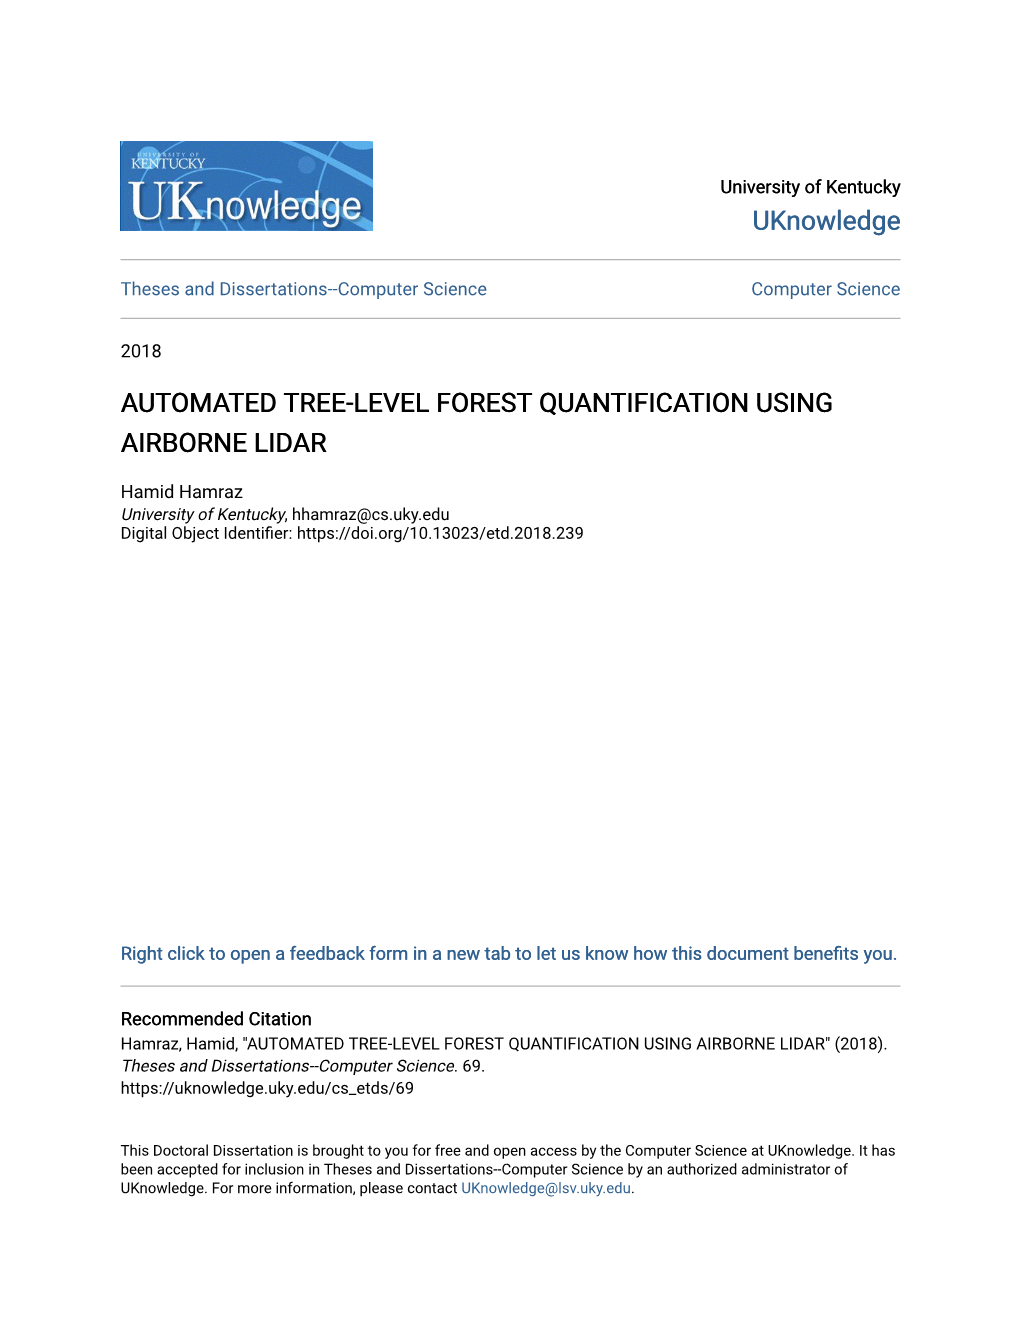 Automated Tree-Level Forest Quantification Using Airborne Lidar